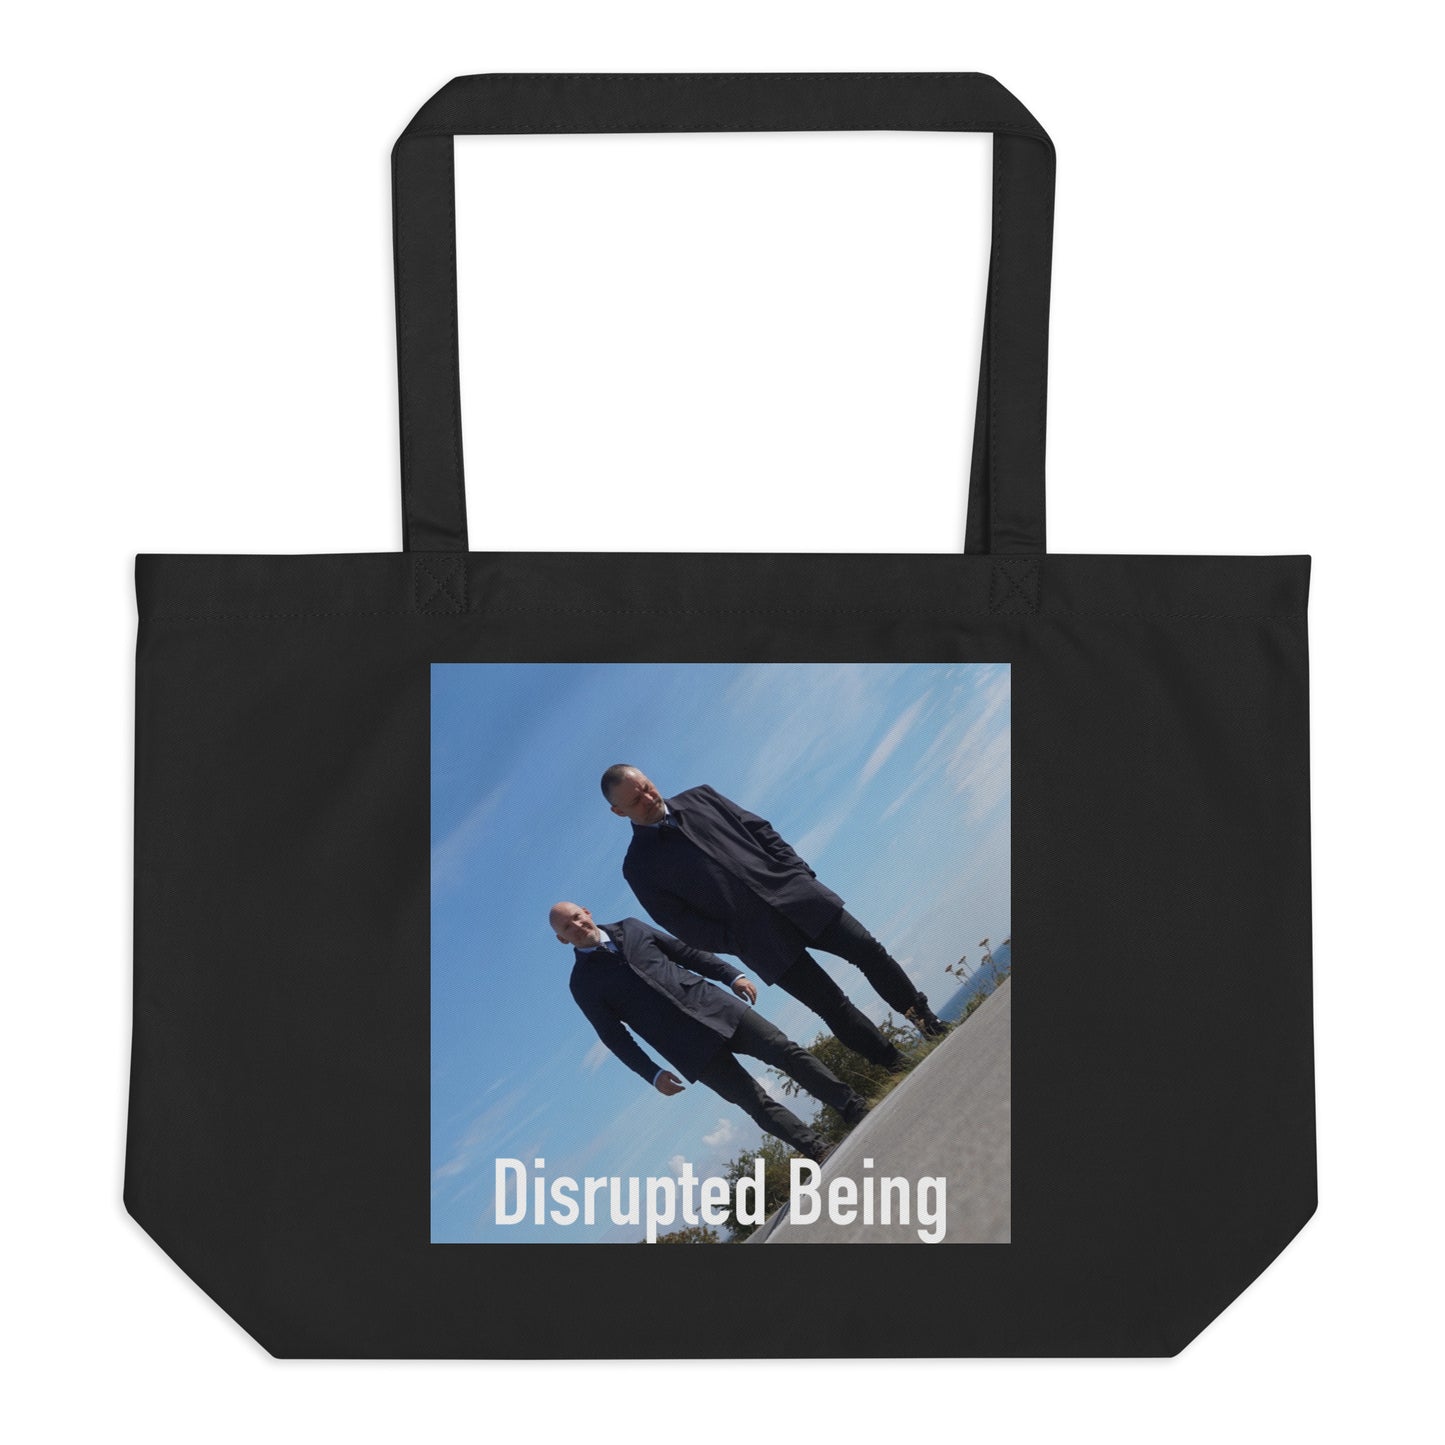 Disrupted Being, official photo and logo, Large organic tote bag